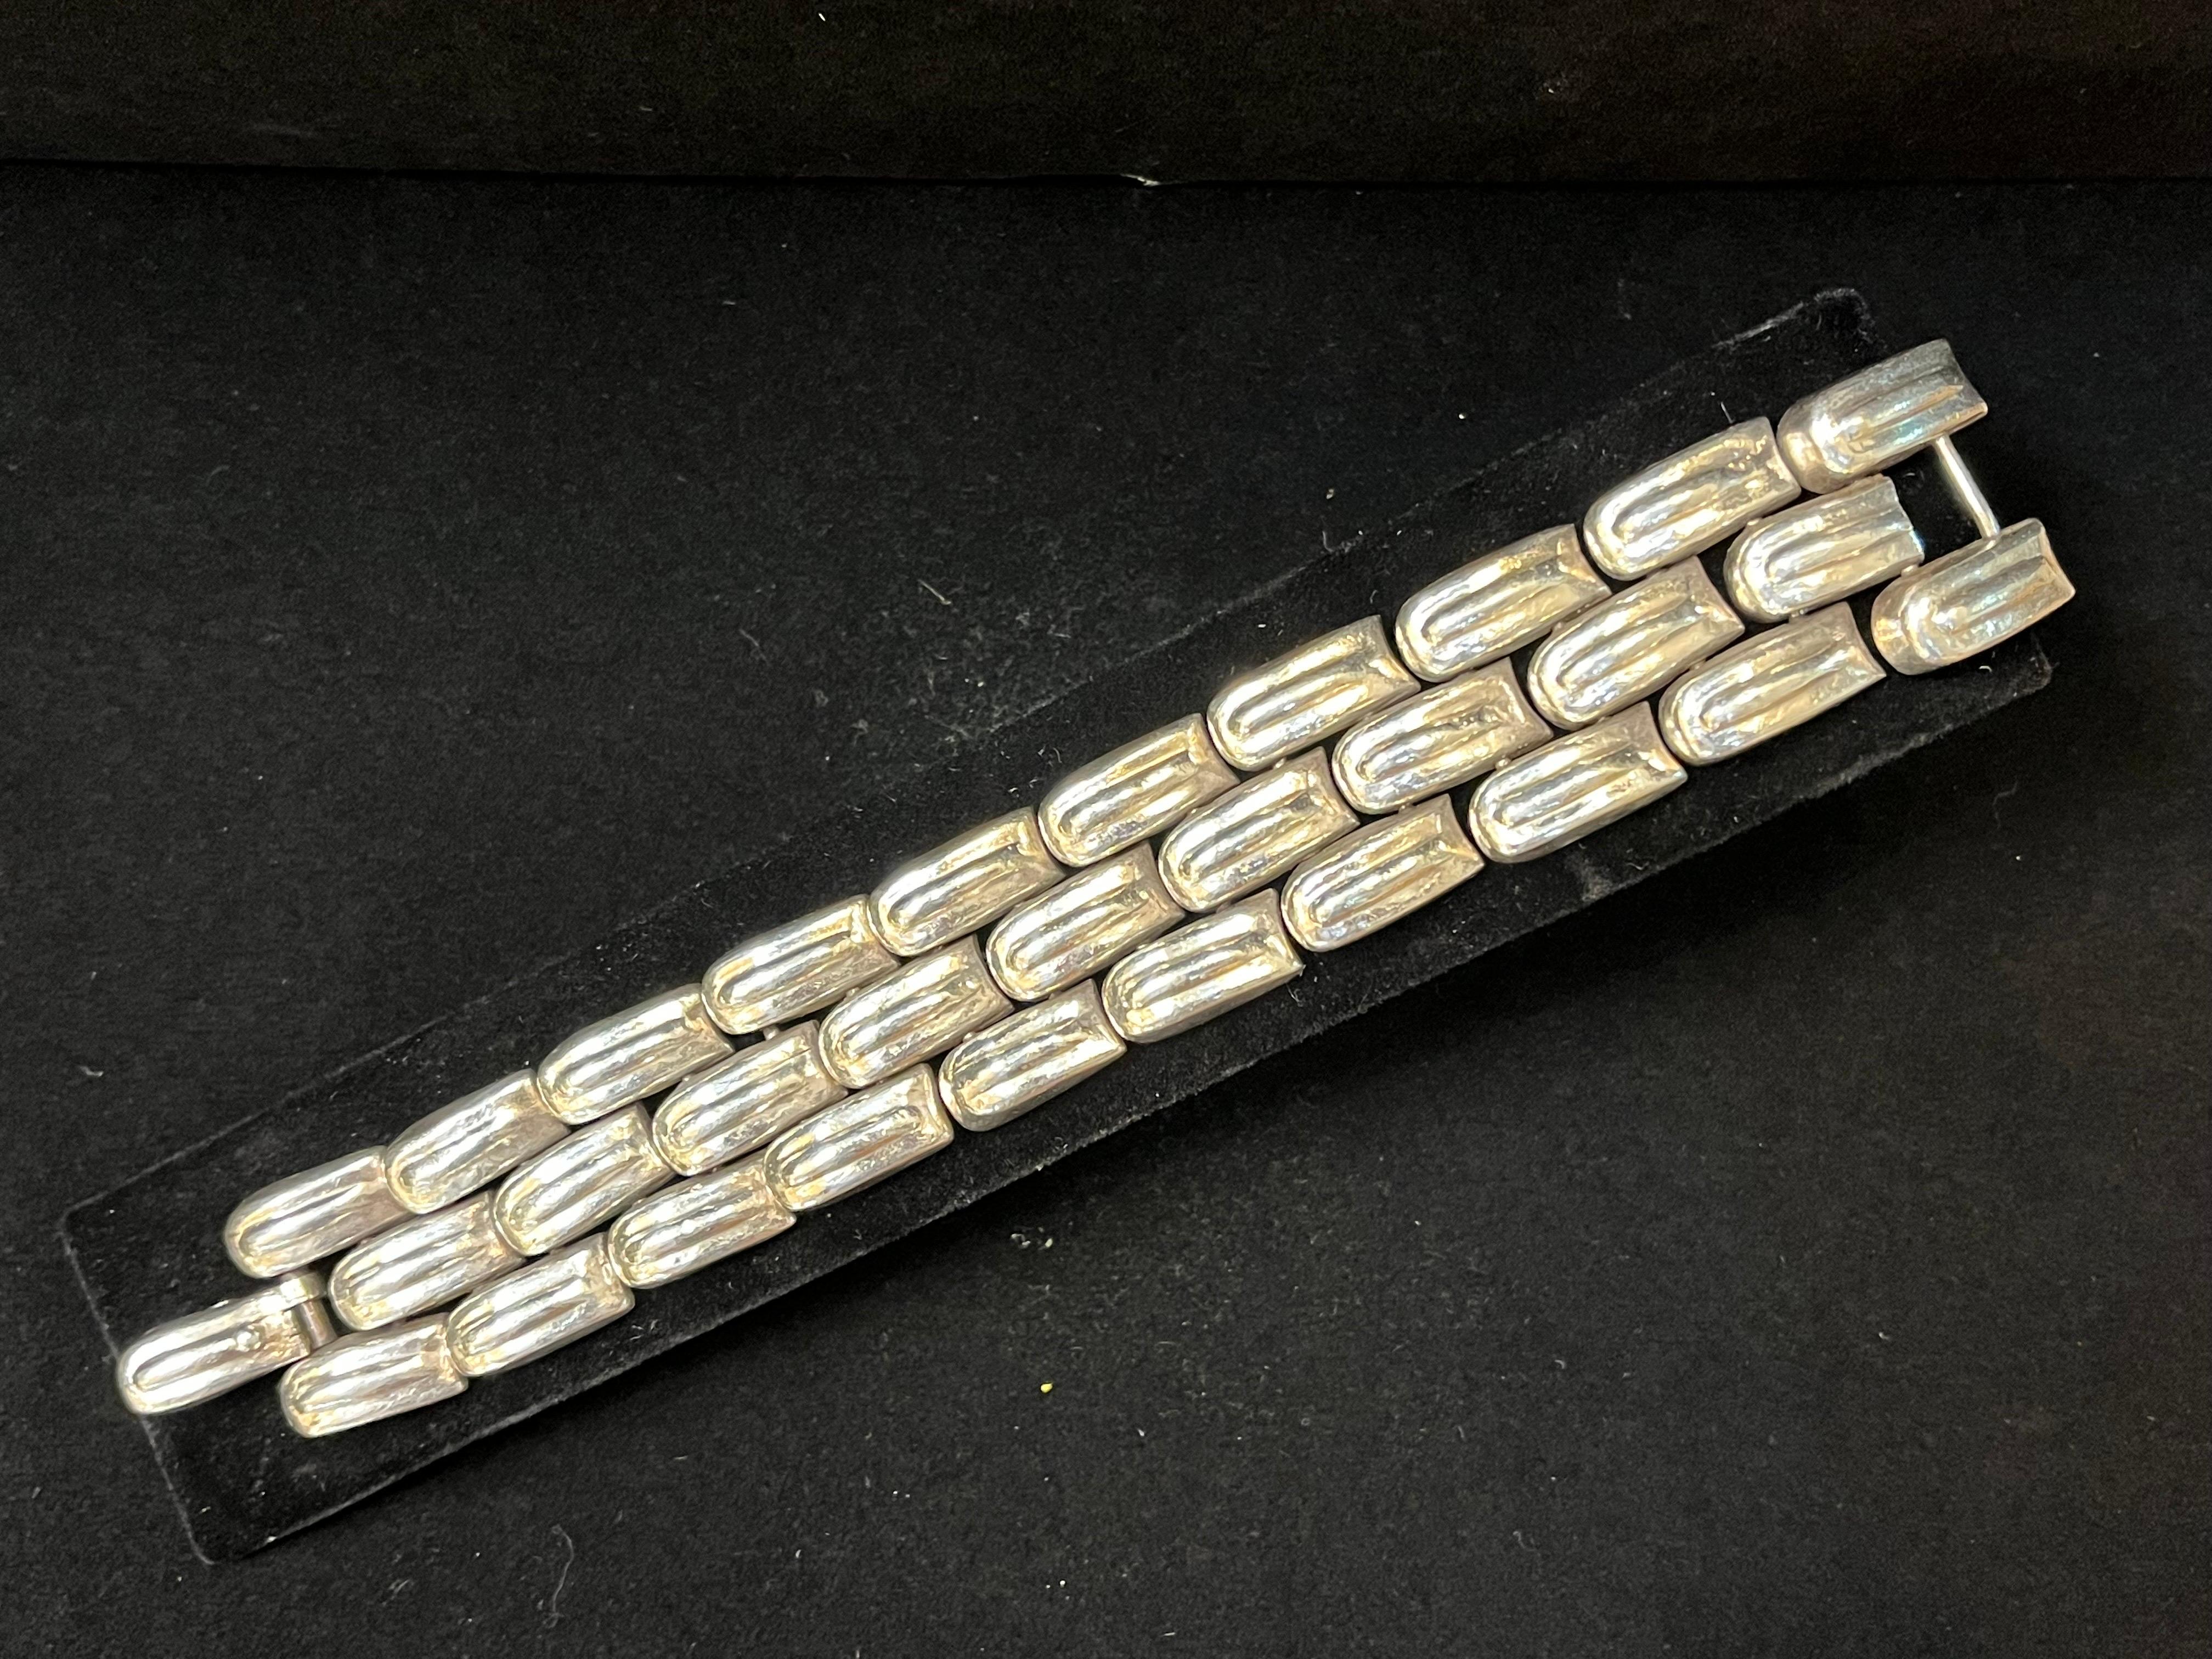 A vintage, circa 1940s signed sterling silver bracelet by William Spratling. This design is called Feather of Quetzalcoatl. According to 